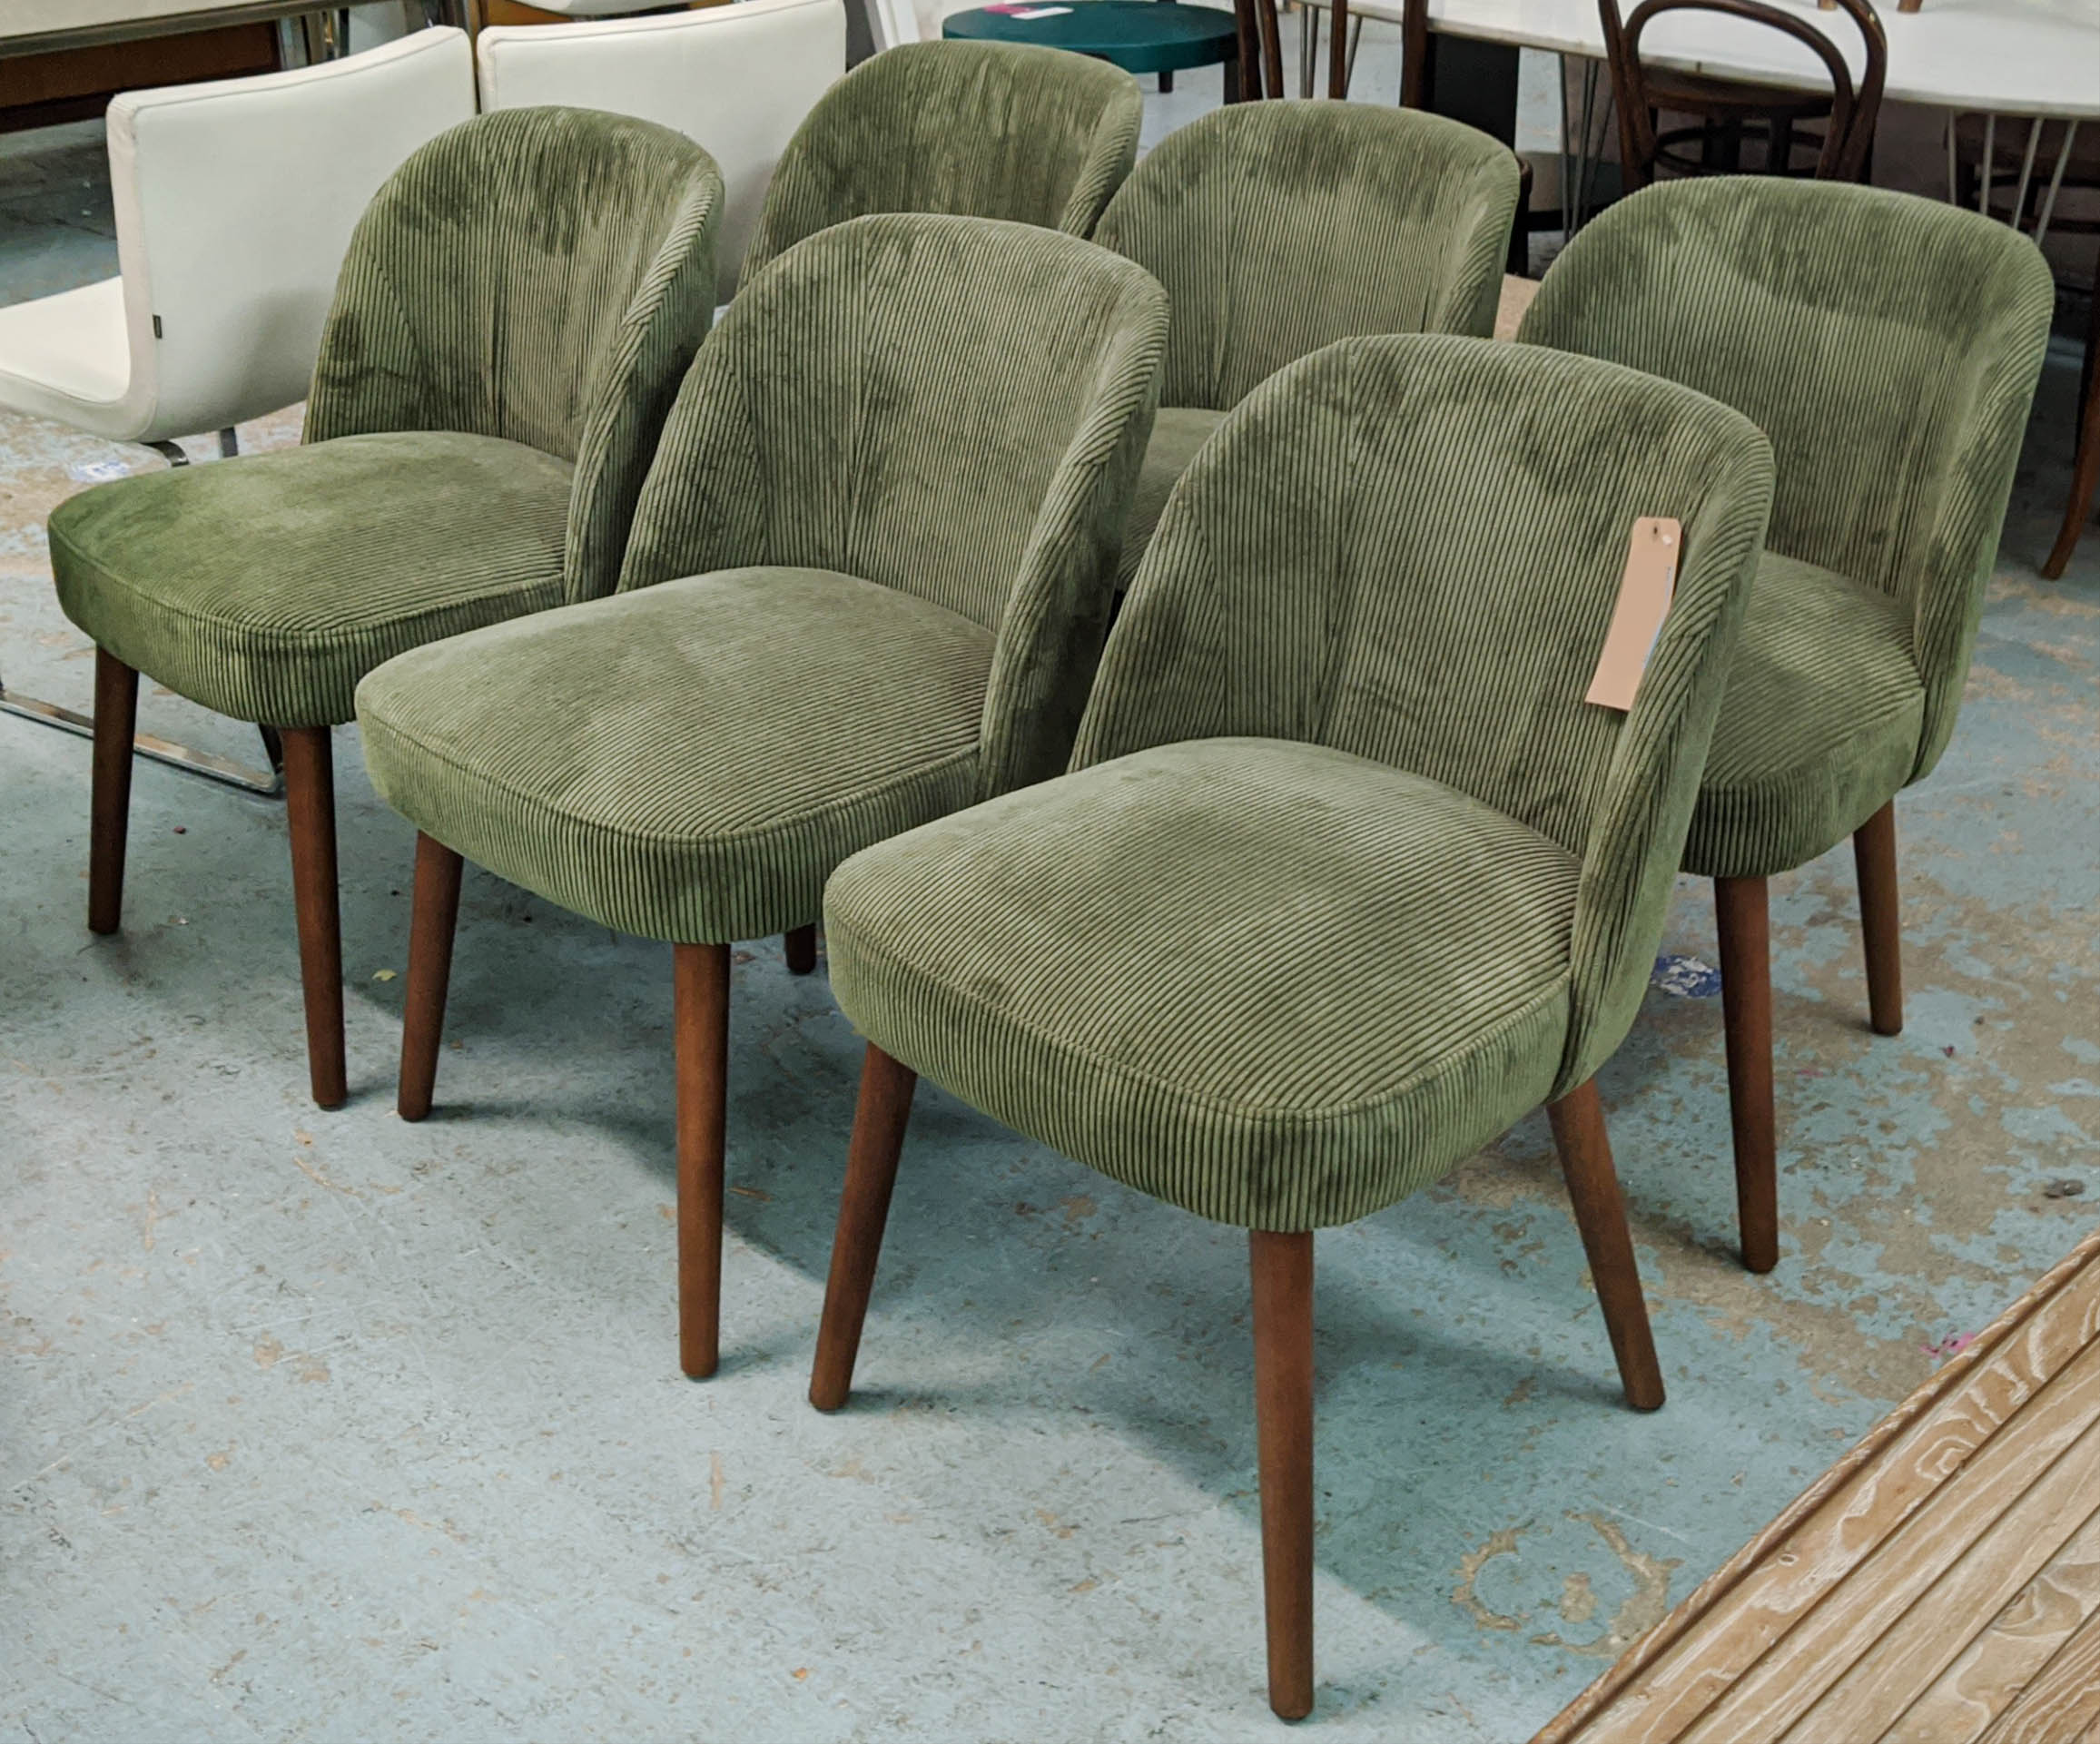 MADE.COM SWINTON CHAIRS, 75cm H, a set of six, with sage corduroy velvet upholstery. (6)